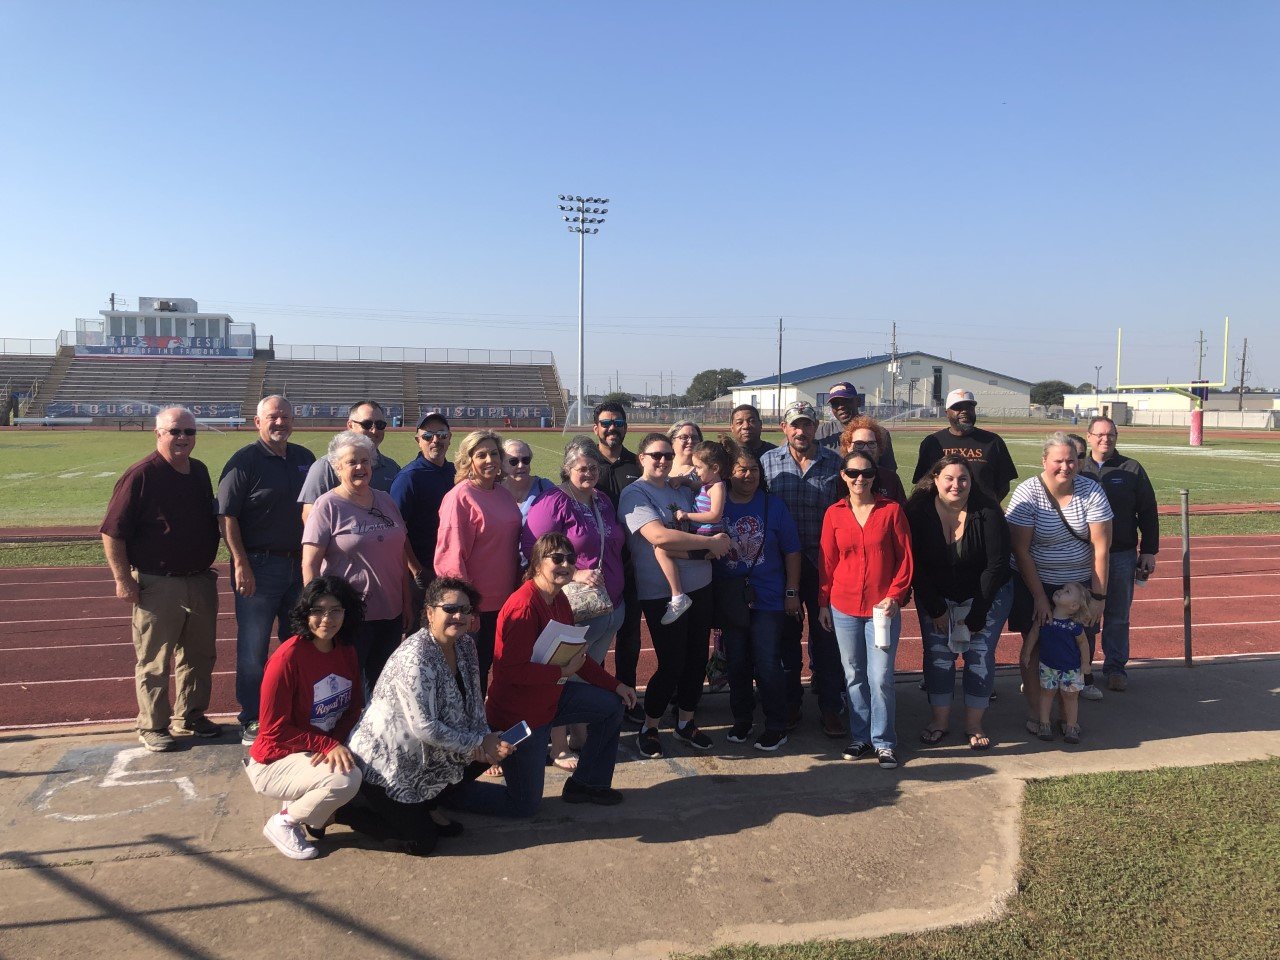 Members of the Royal ISD Facilities Advisory Committee gather Oct. 8 at Falcon Stadium as part of an area tour in which district officials described the forthcoming housing developments in the area. Officials said the district expects about 22,000 homes, and an estimated new 13,000 students, in the next few years.